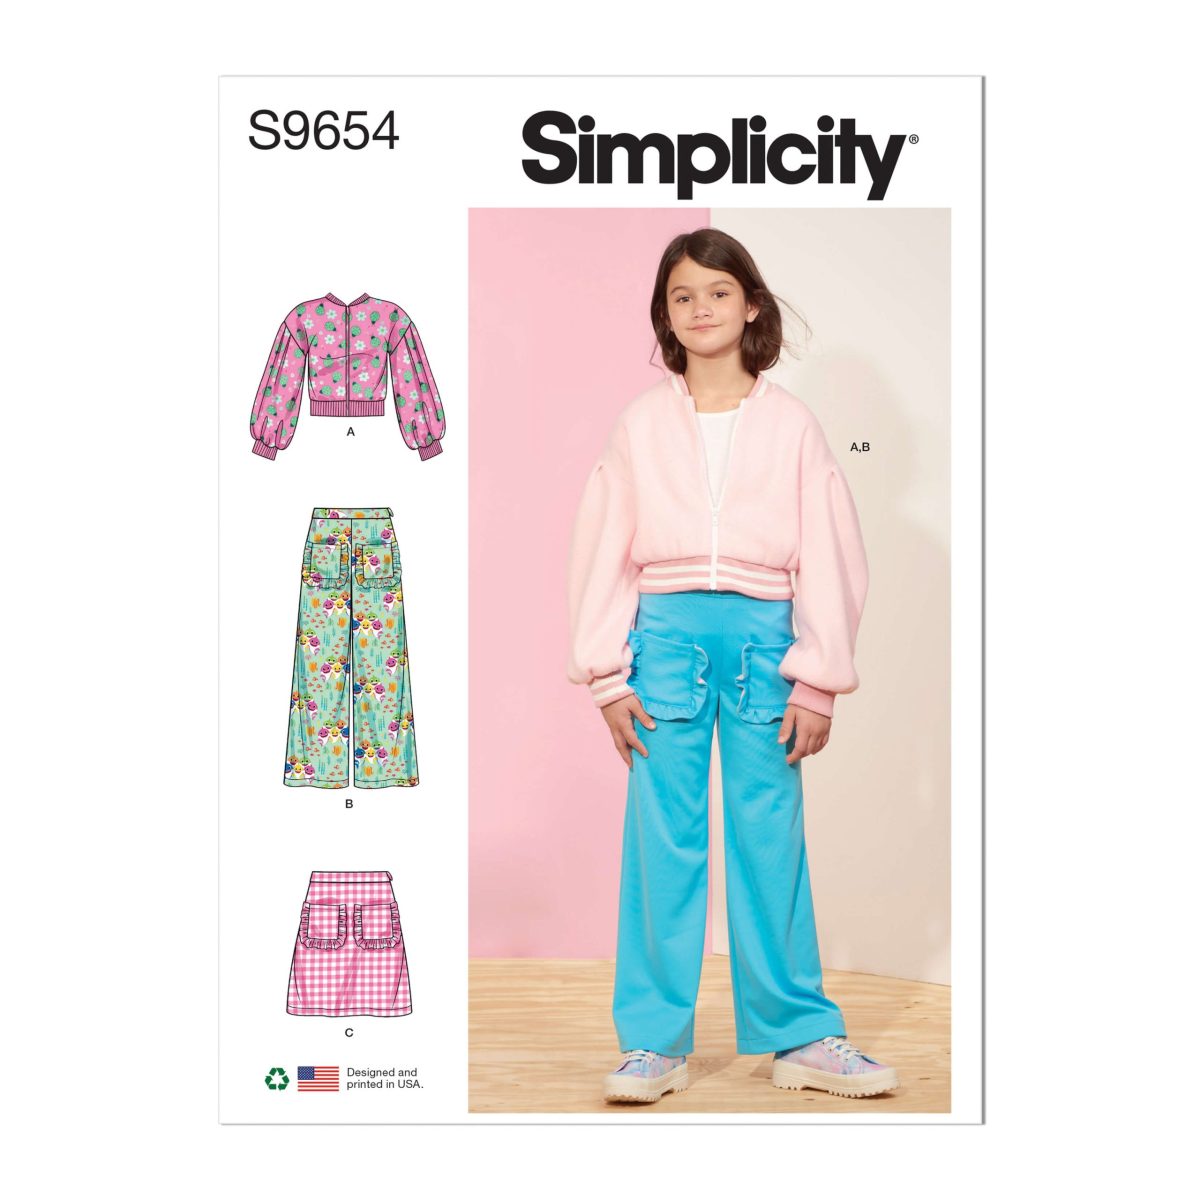 Simplicity Sewing Pattern S9654 Children's and Girls' Jacket, Trousers and Skirt